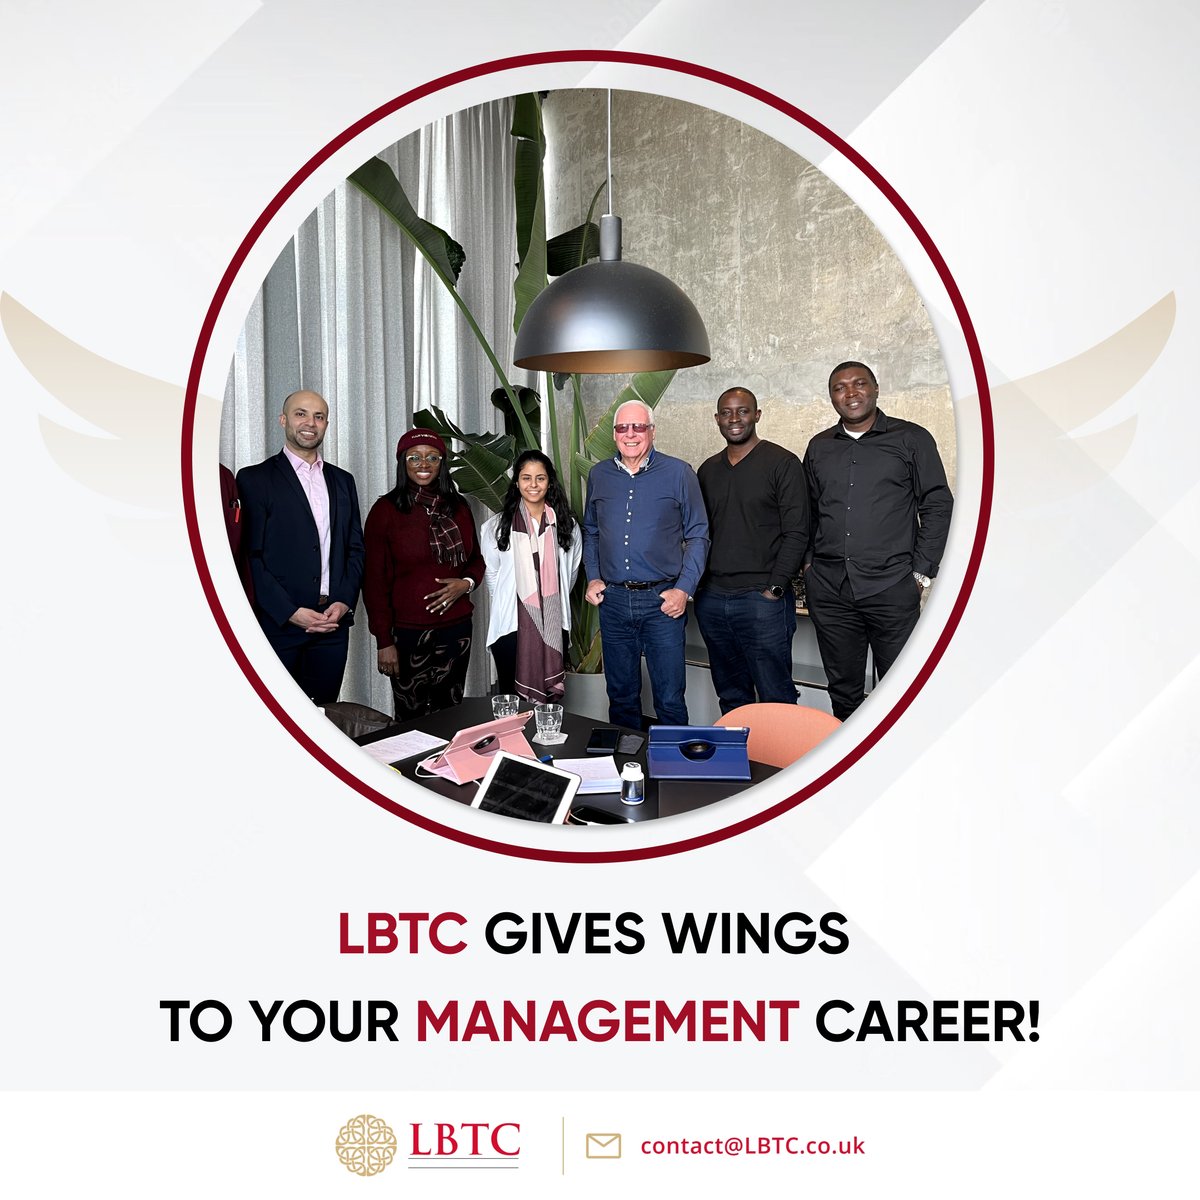 Find numerous #management learning #courses under one roof with LBTC.

Enrol today: lbtc.co.uk

#courses2022 #managementconsulting #friday #london